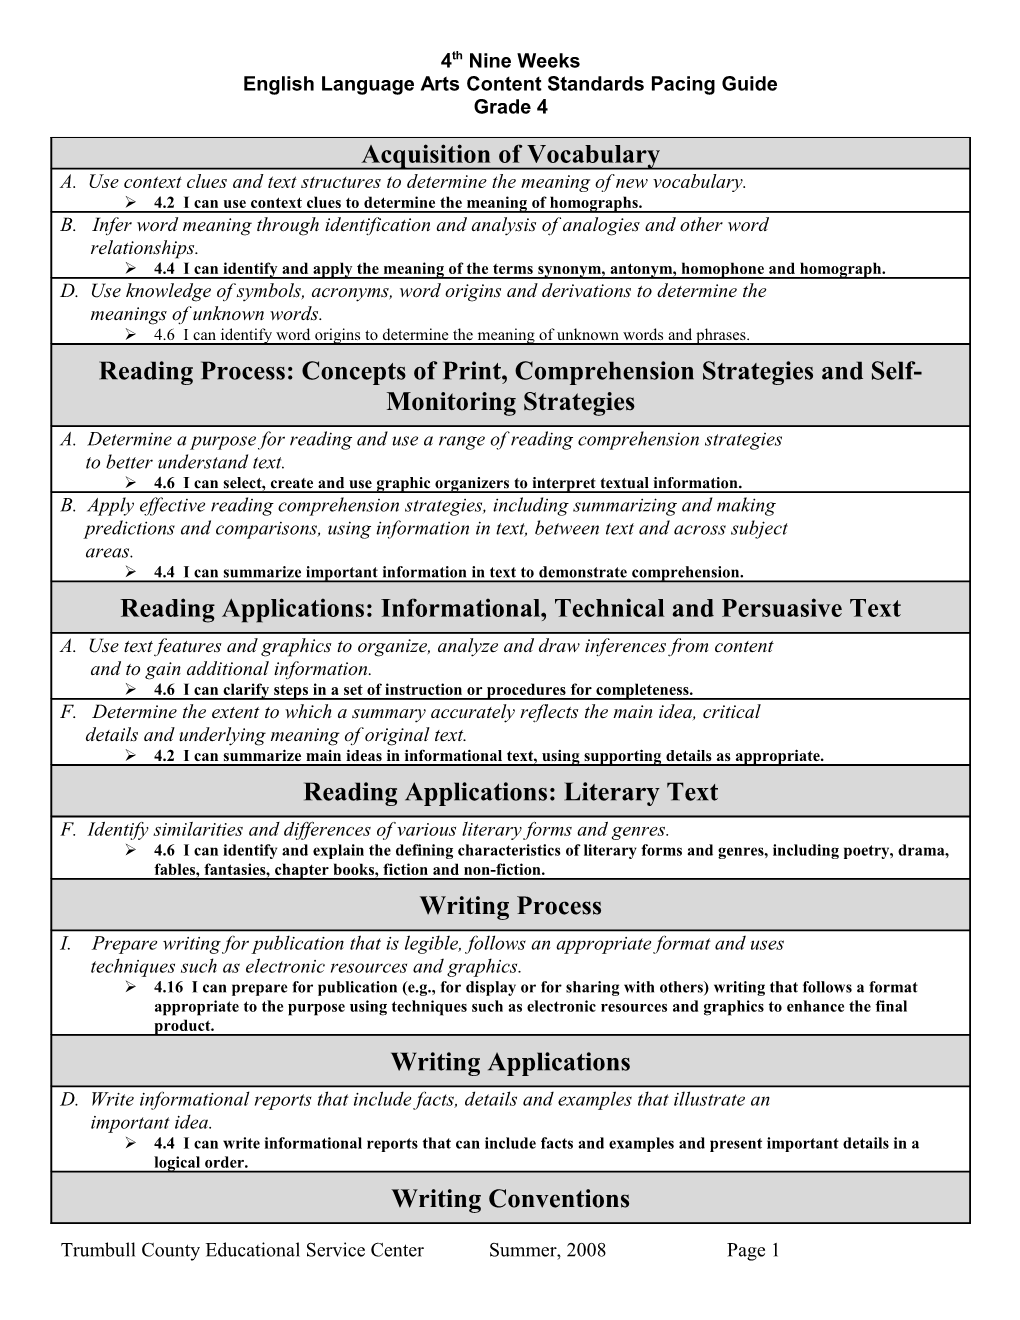 English Language Arts Content Standards Pacing Guide